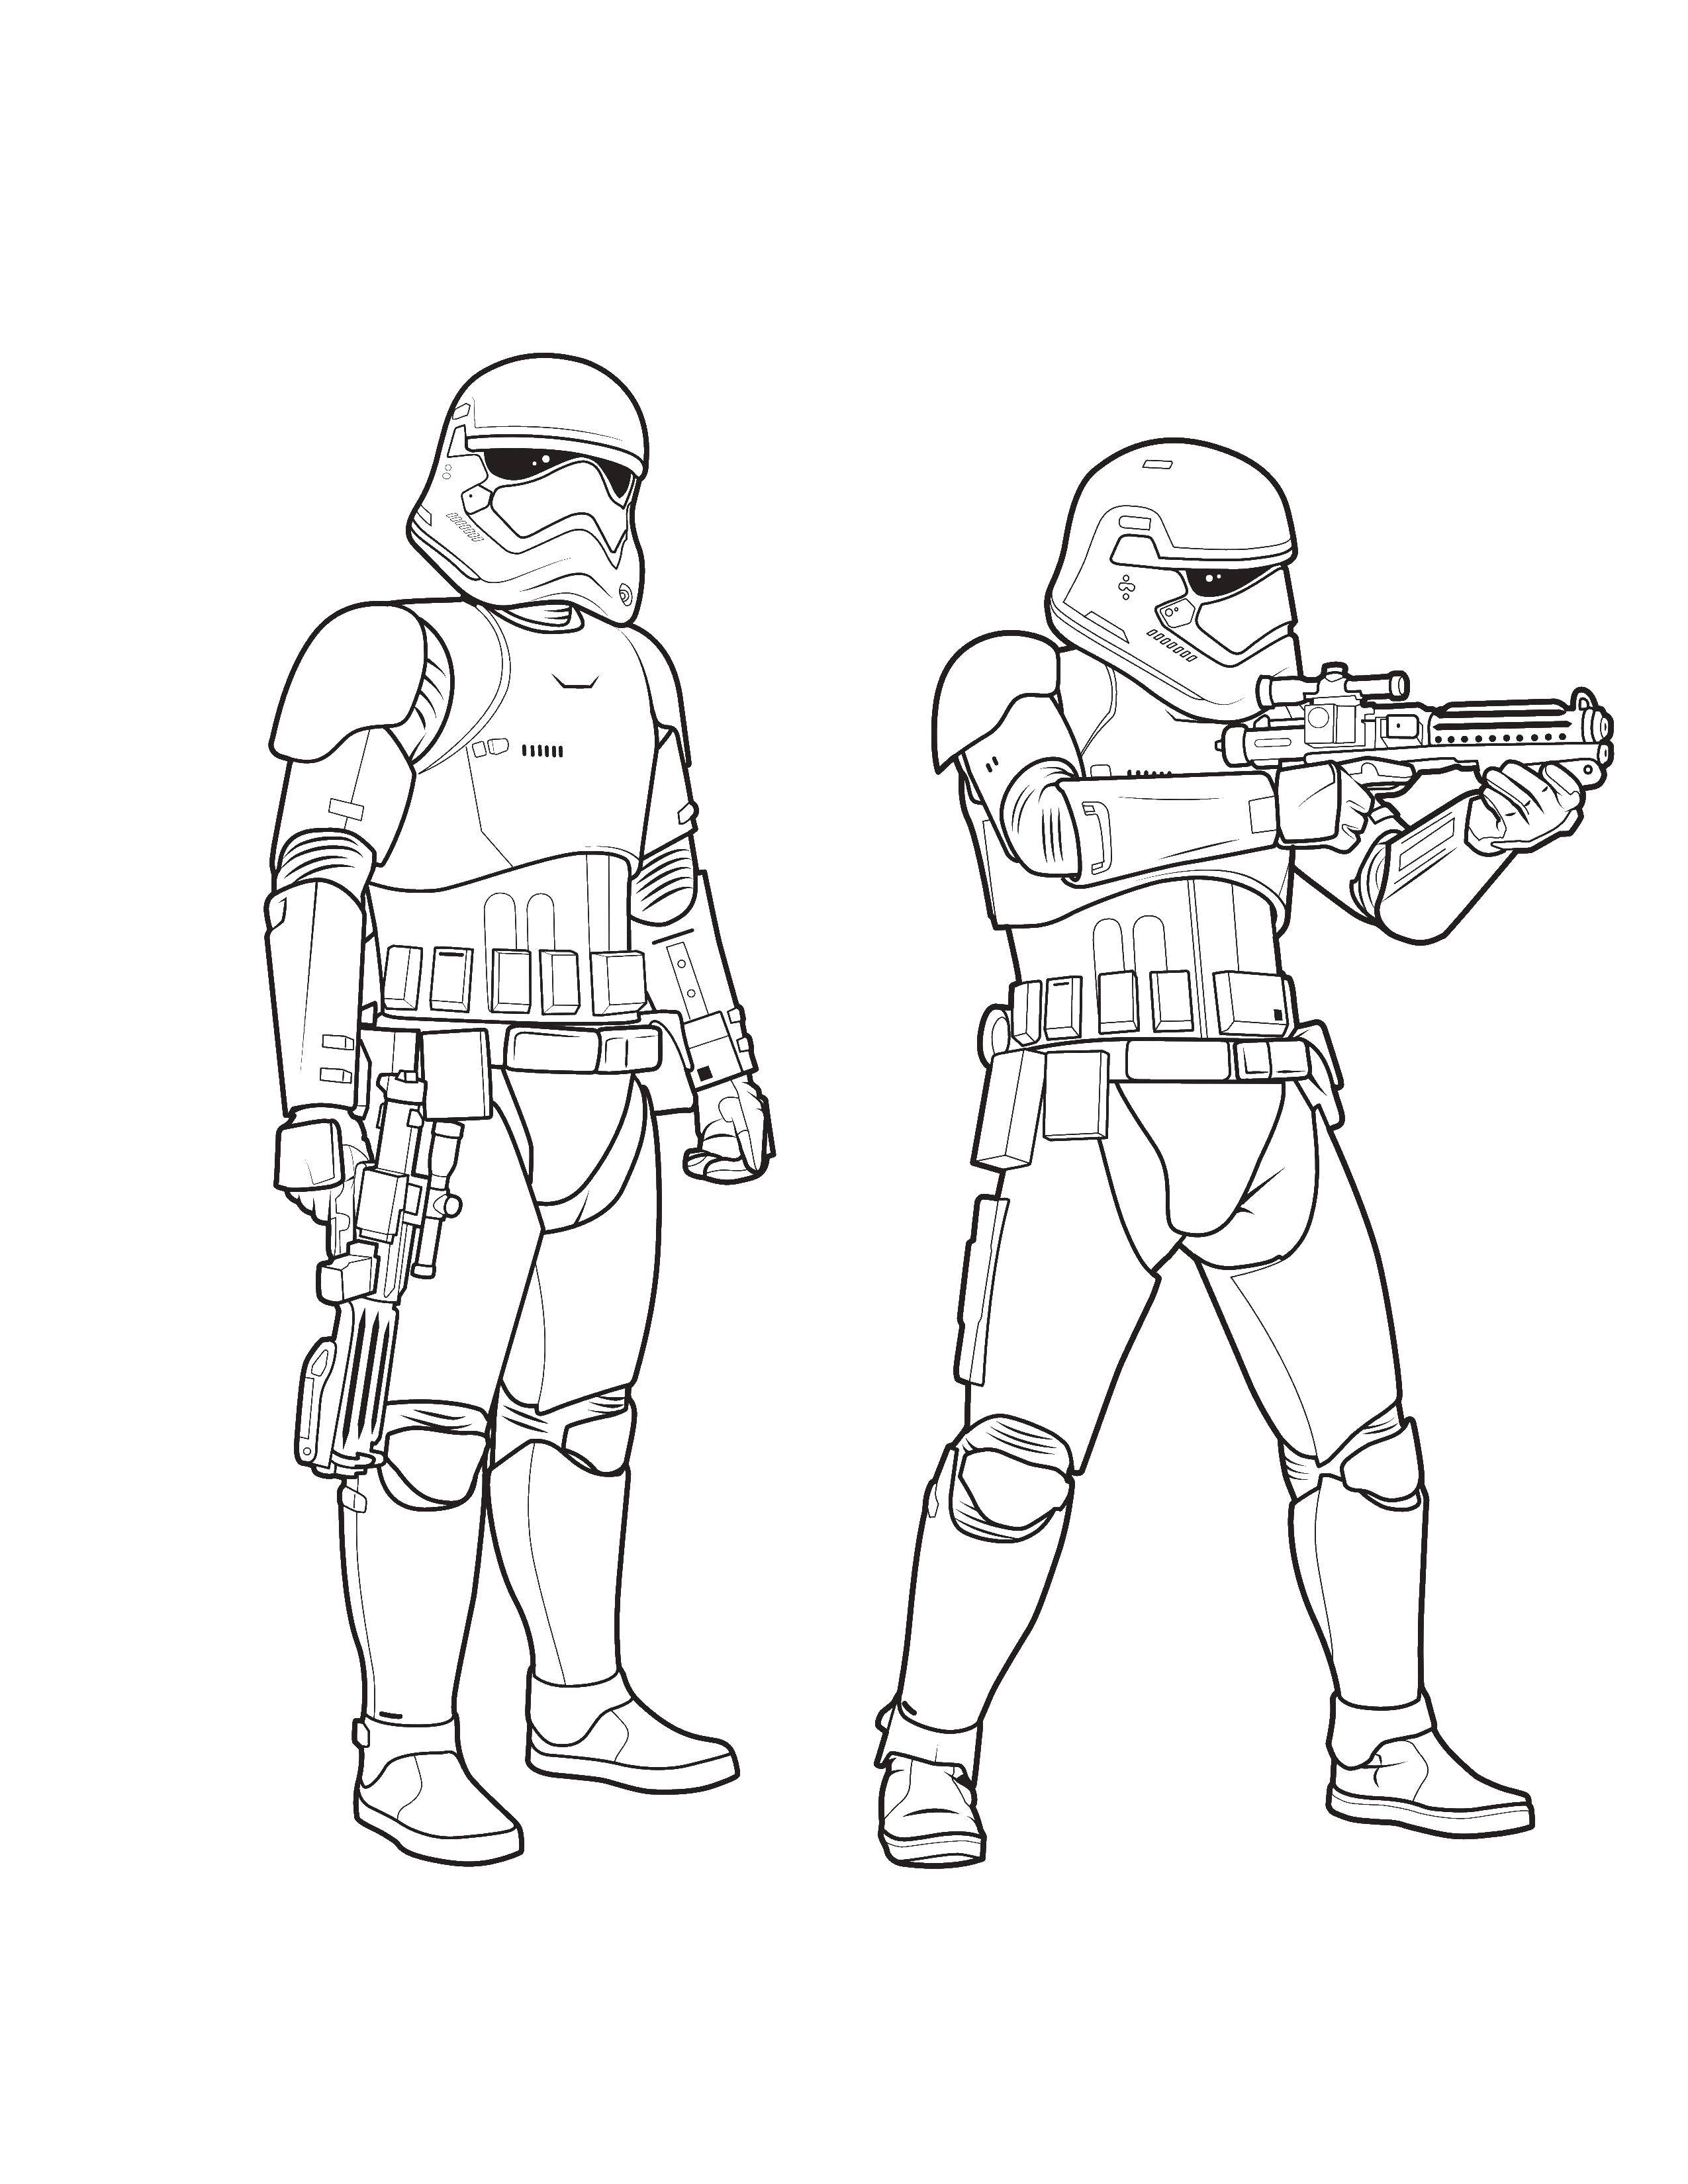 Coloring Stormtroopers. Category star wars . Tags:  stormtroopers, star wars.